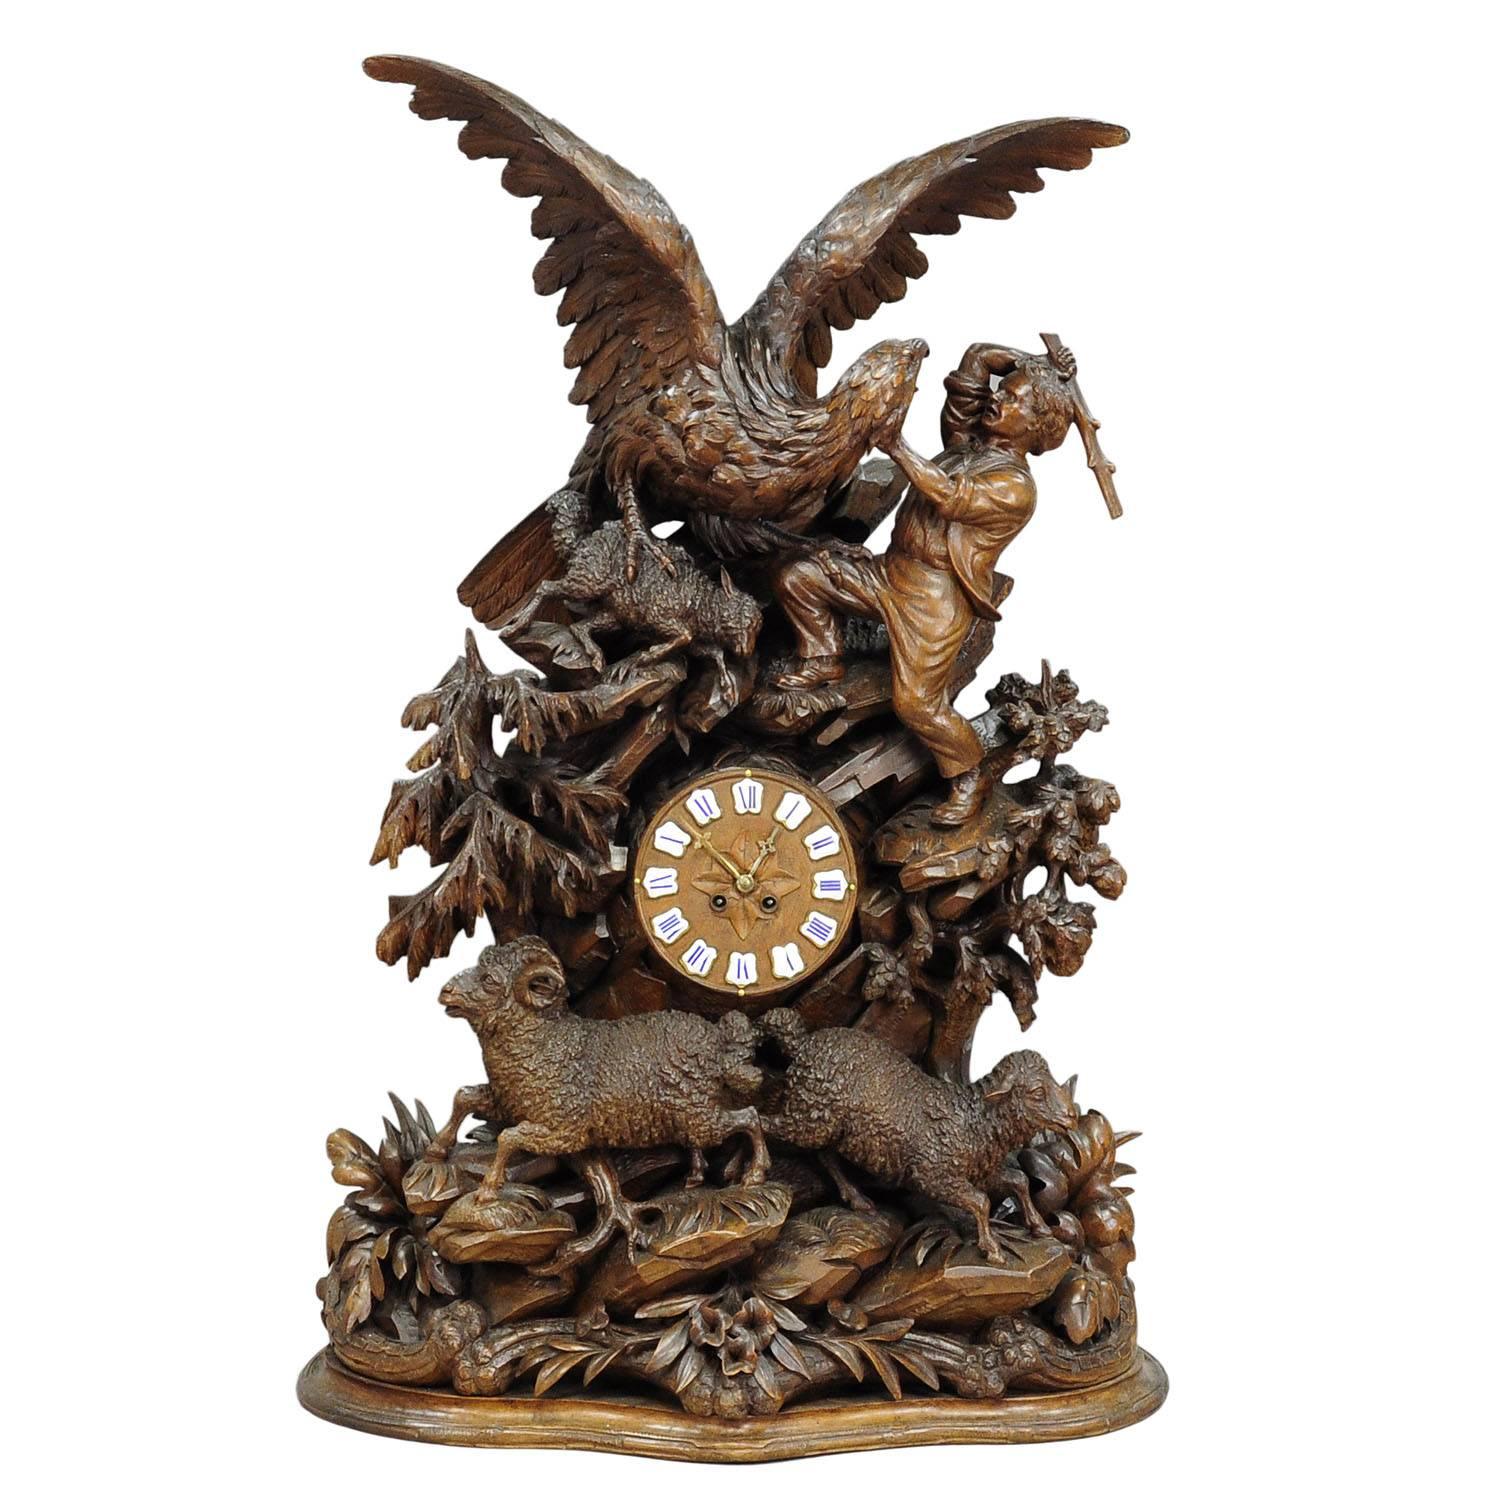 Black Forest Wooden Carved Mantel Clock with Eagle and Shepherd